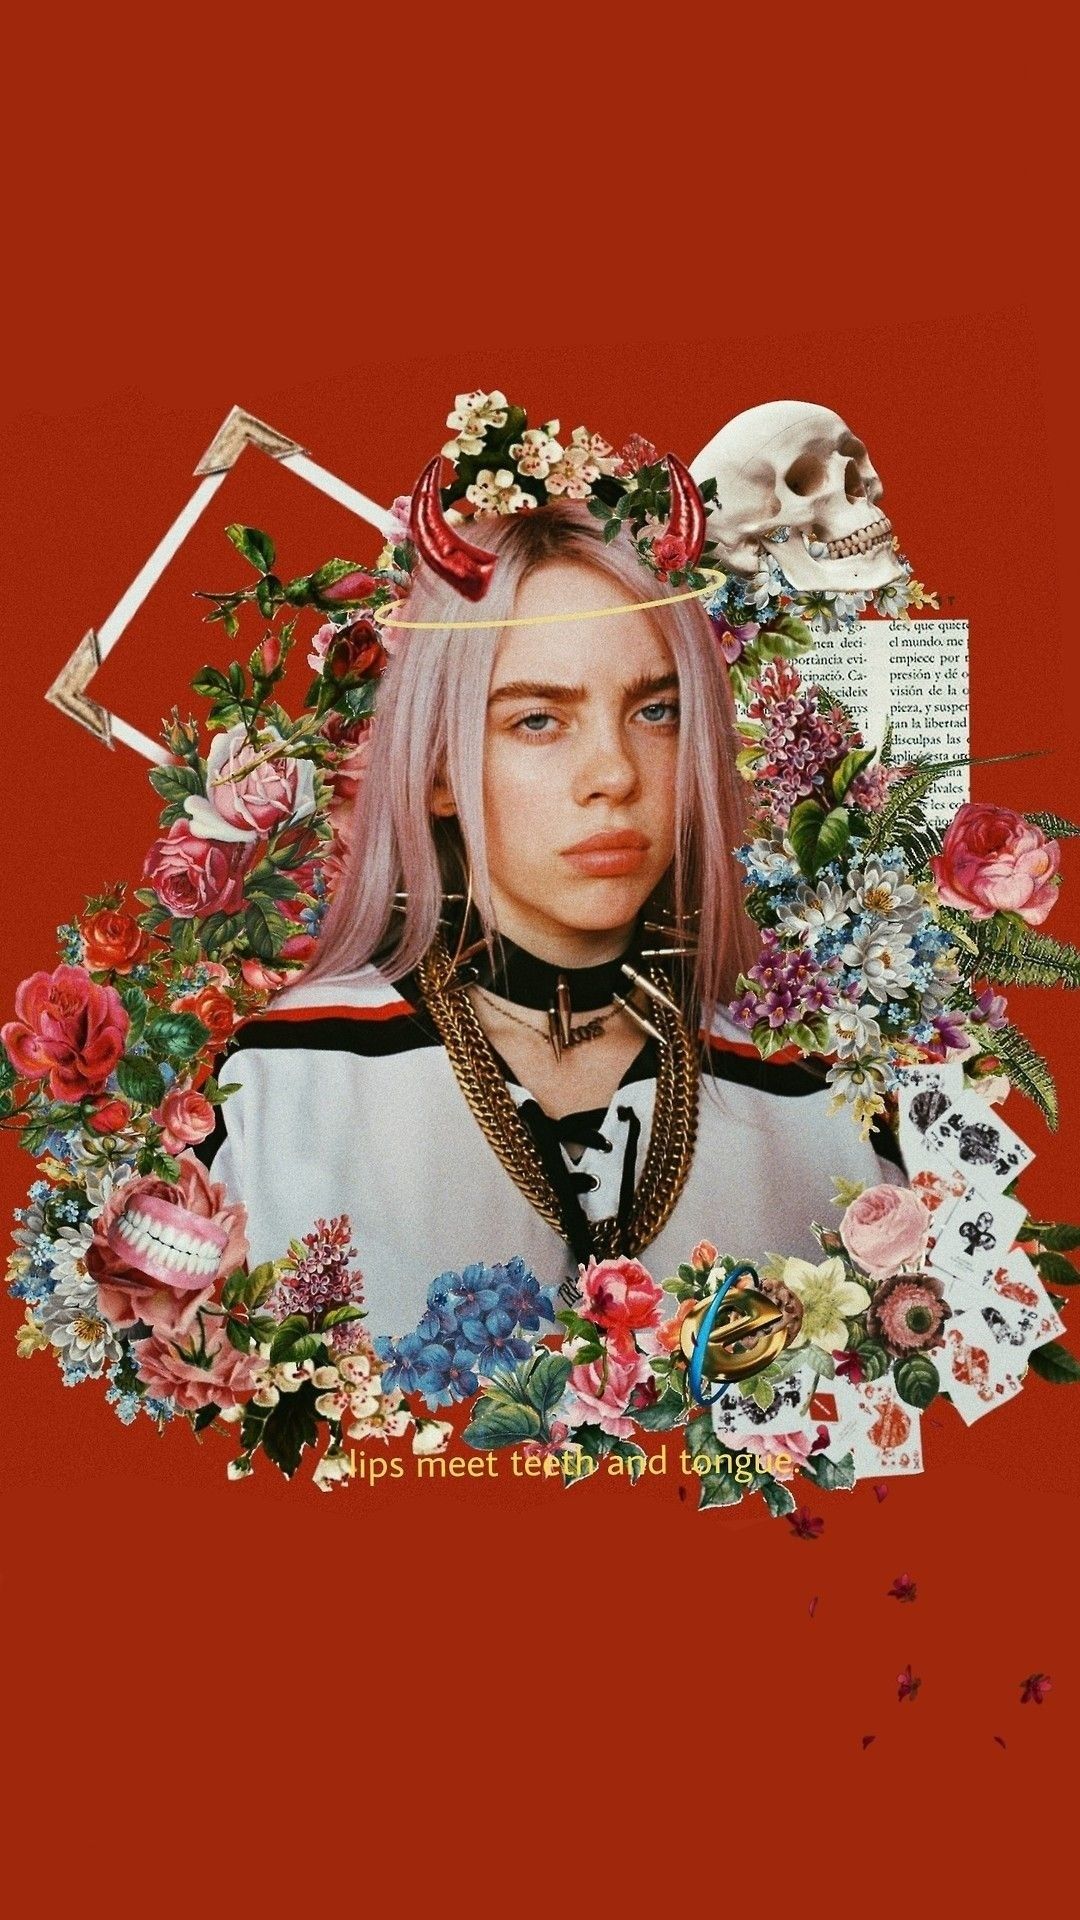 Billie Eilish wallpaper for iPhone with high-resolution 1080x1920 pixel. You can use this wallpaper for your iPhone 5, 6, 7, 8, X, XS, XR backgrounds, Mobile Screensaver, or iPad Lock Screen - Billie Eilish